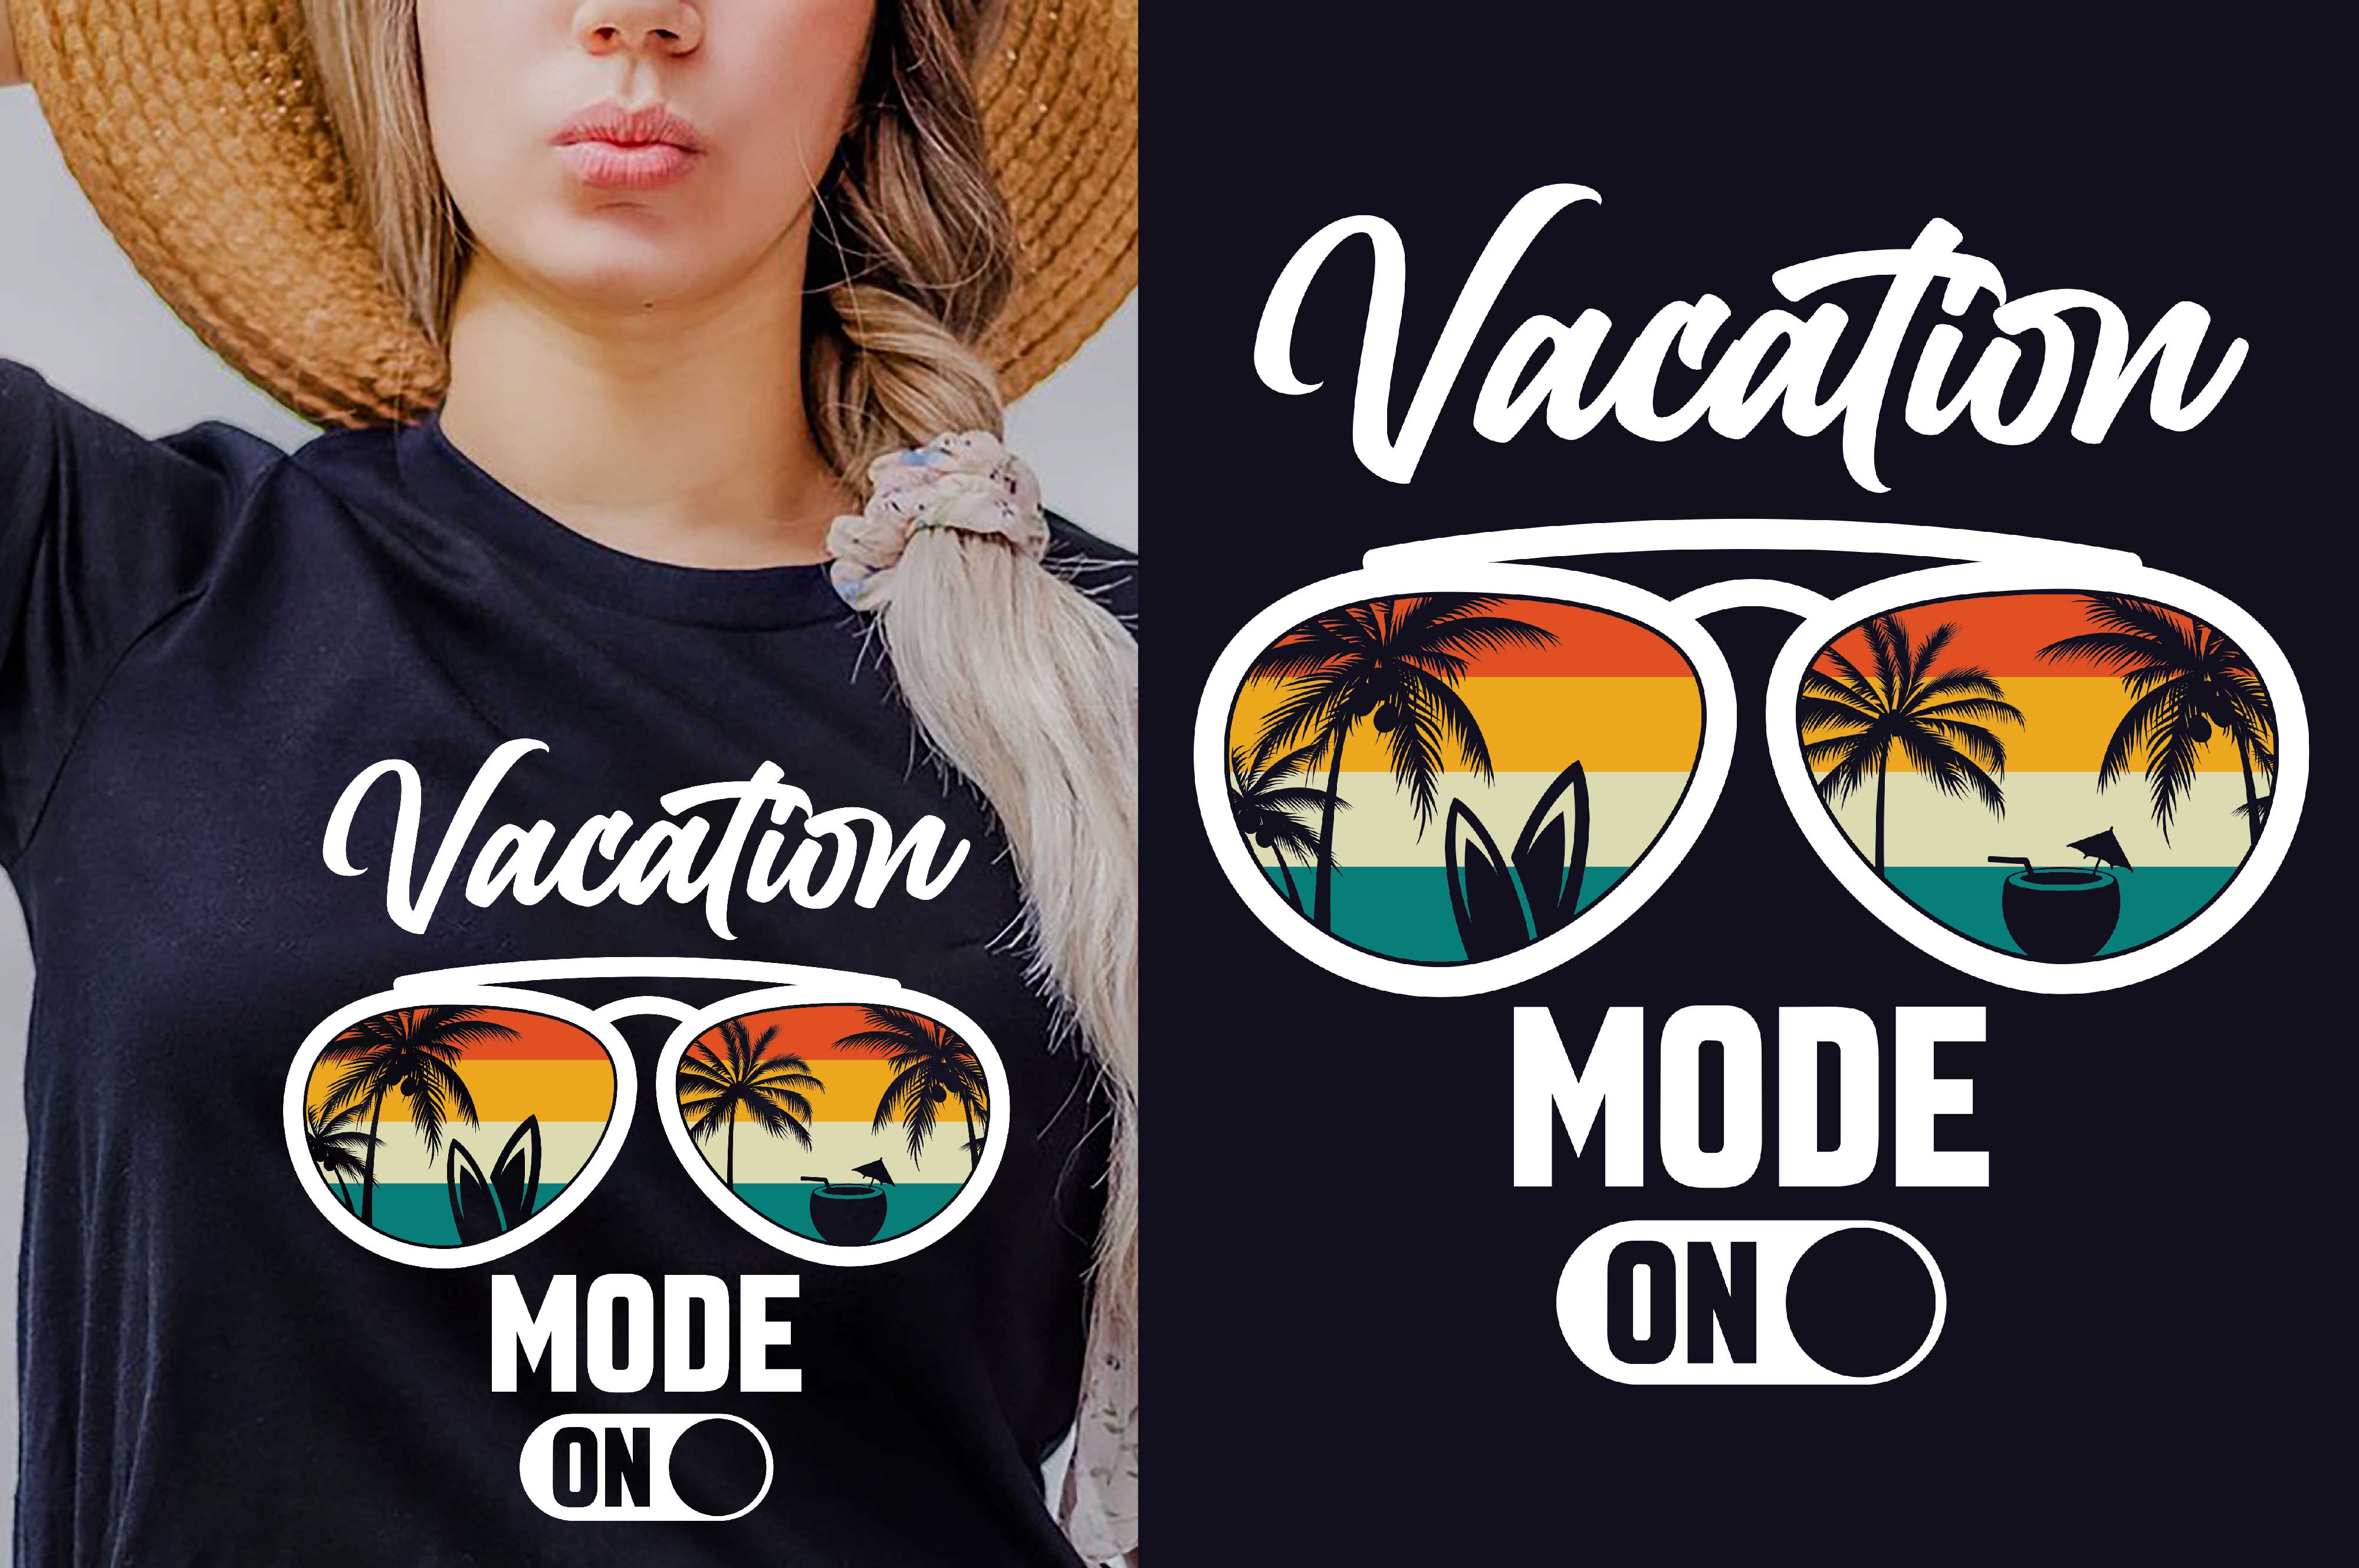 Woman wearing a vacation mode on t - shirt.